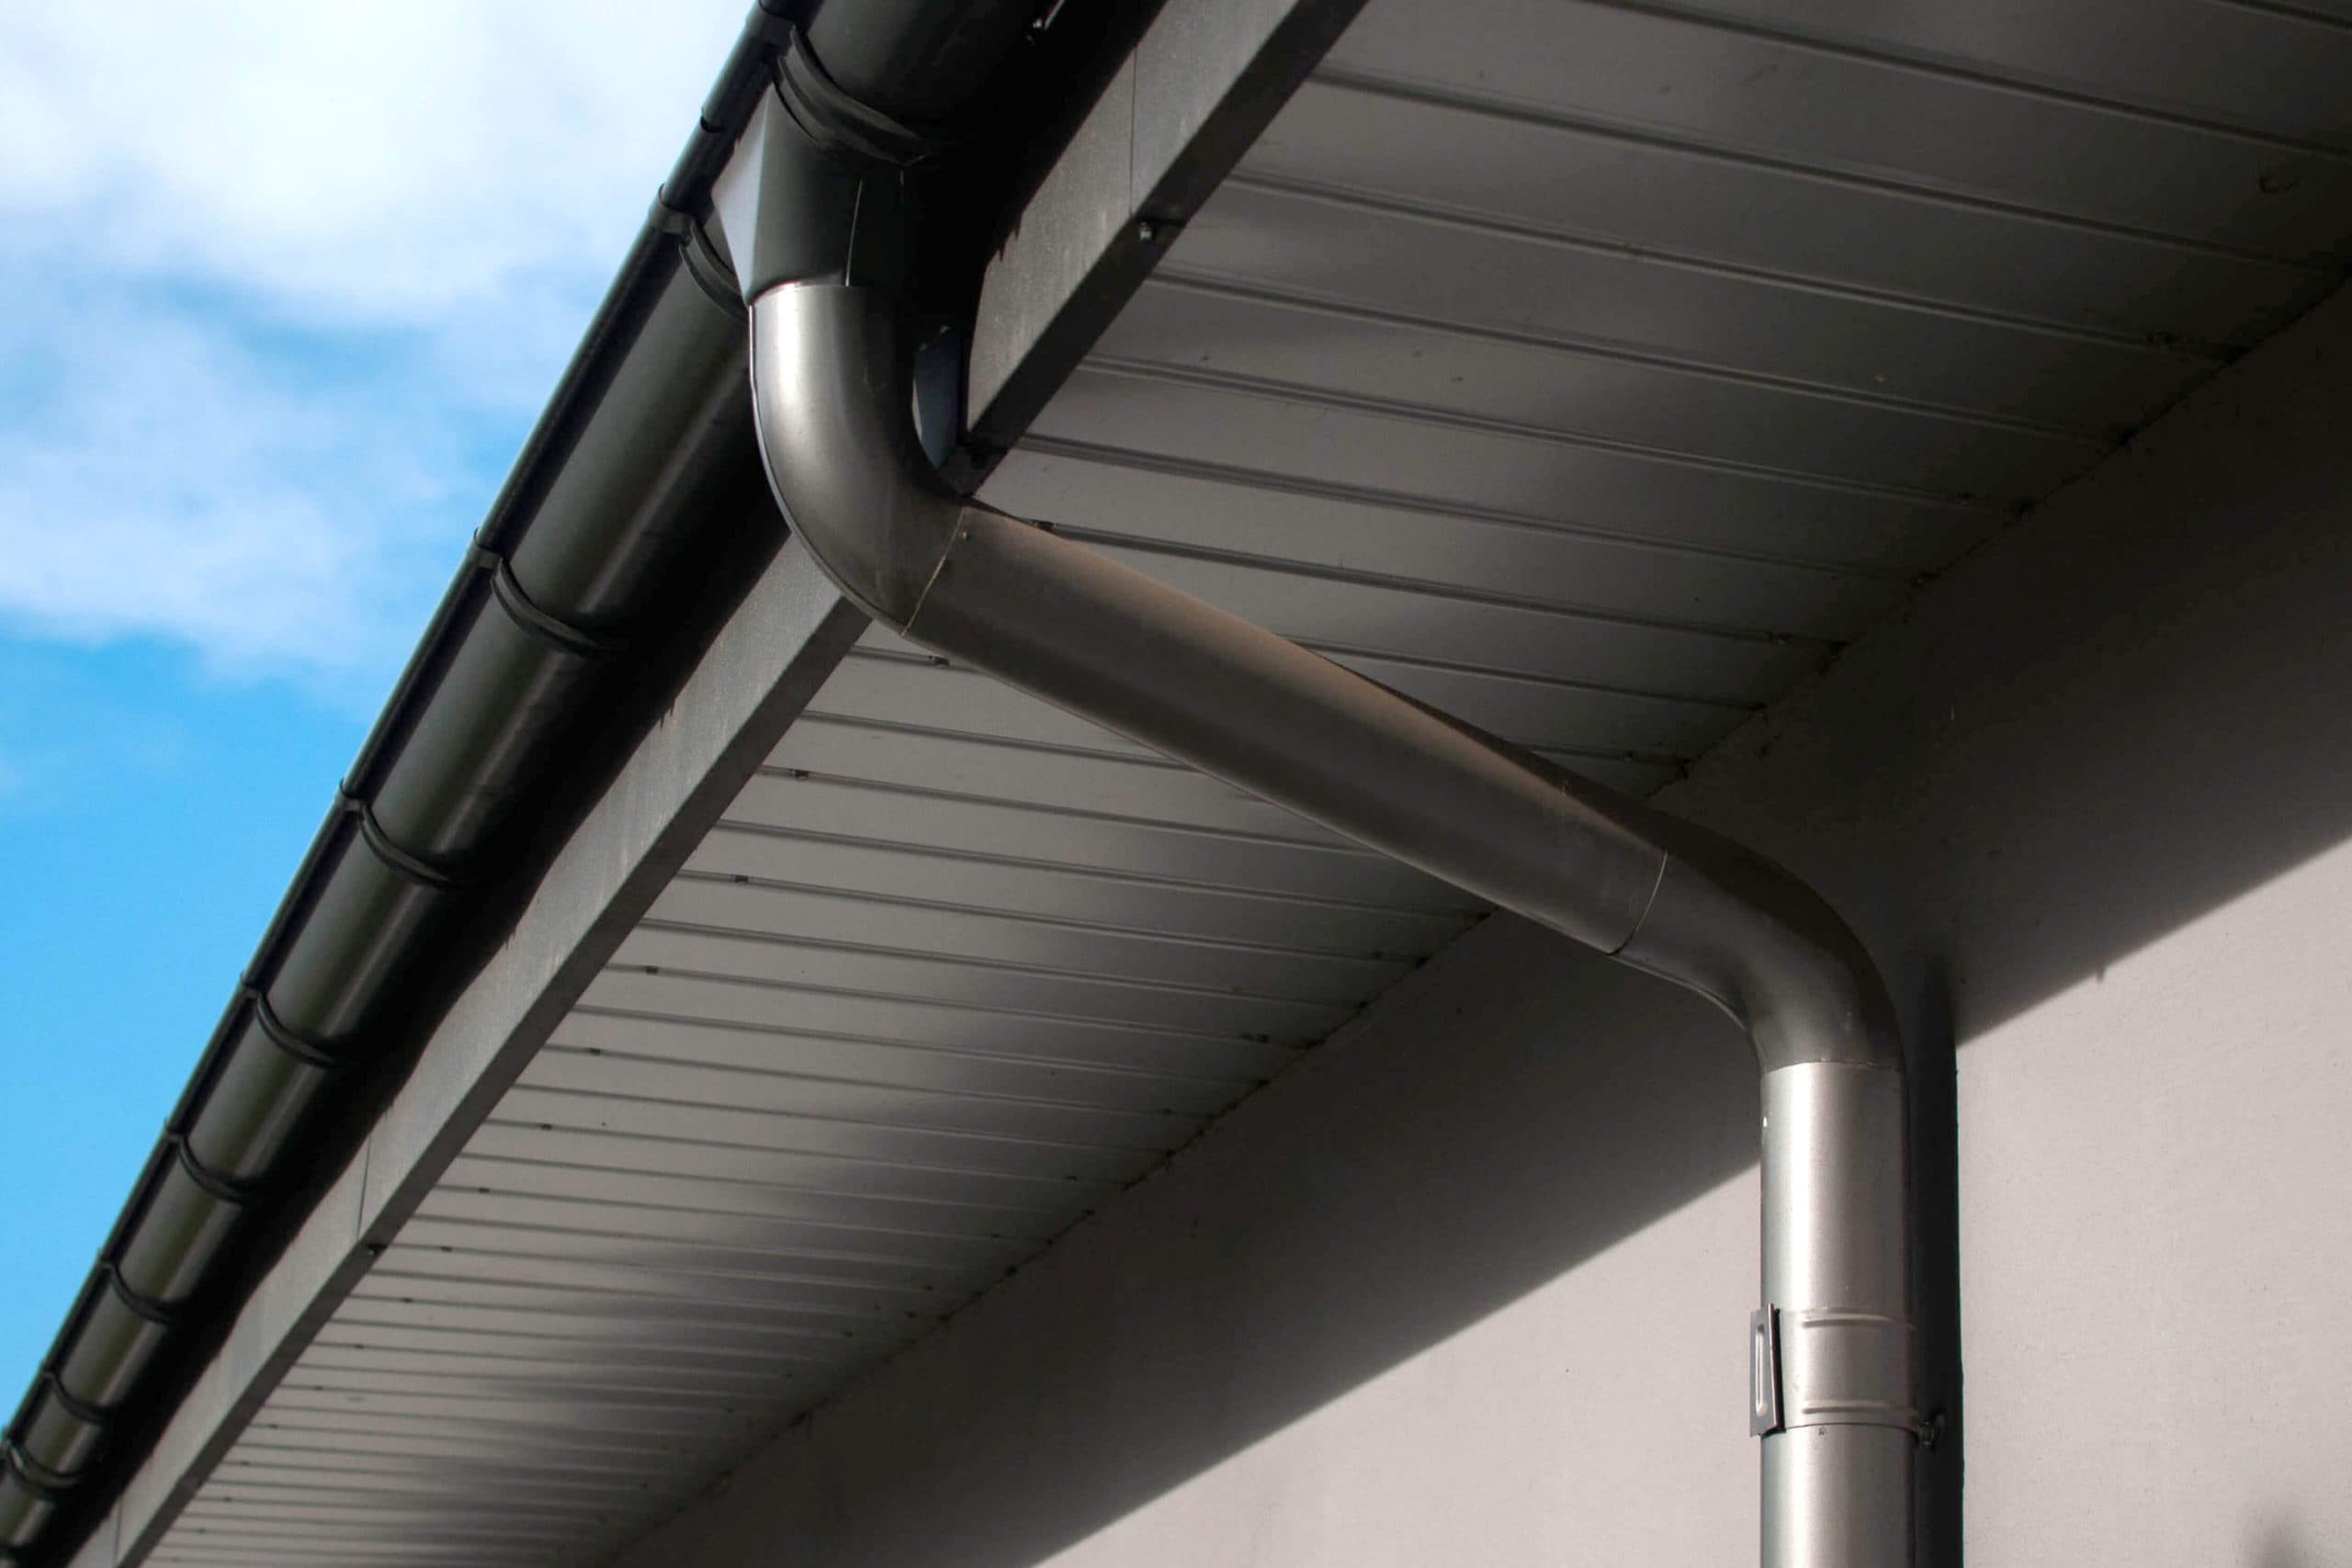 Reliable and affordable Galvanized gutters installation in Pensacola